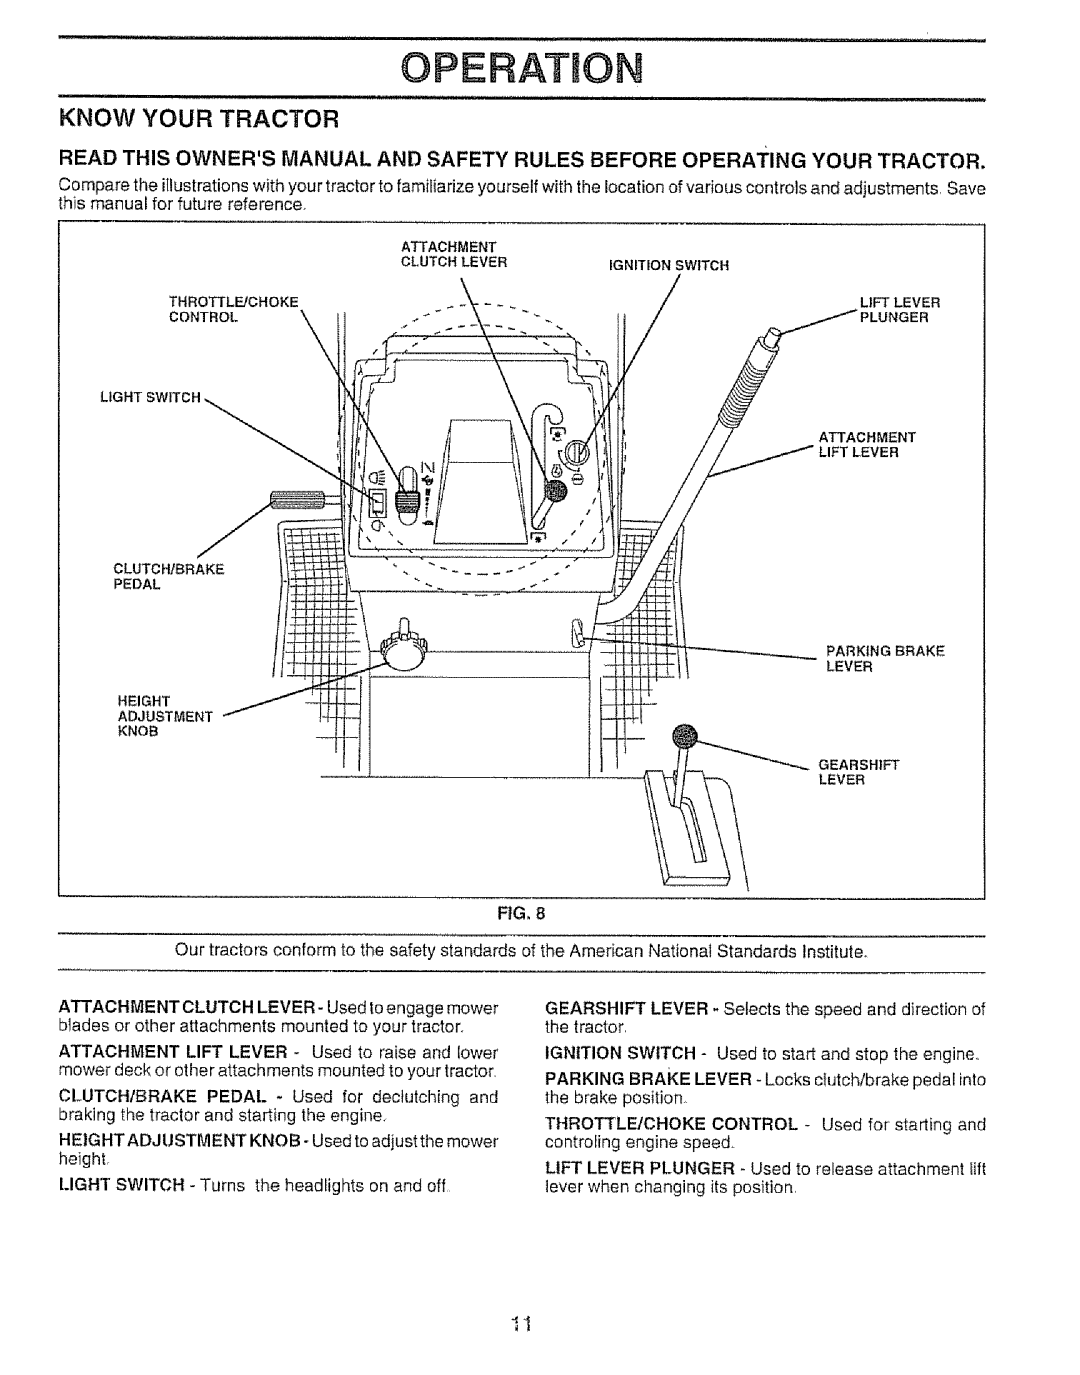 Sears 917.257651 owner manual Operation, Know Your Tractor 